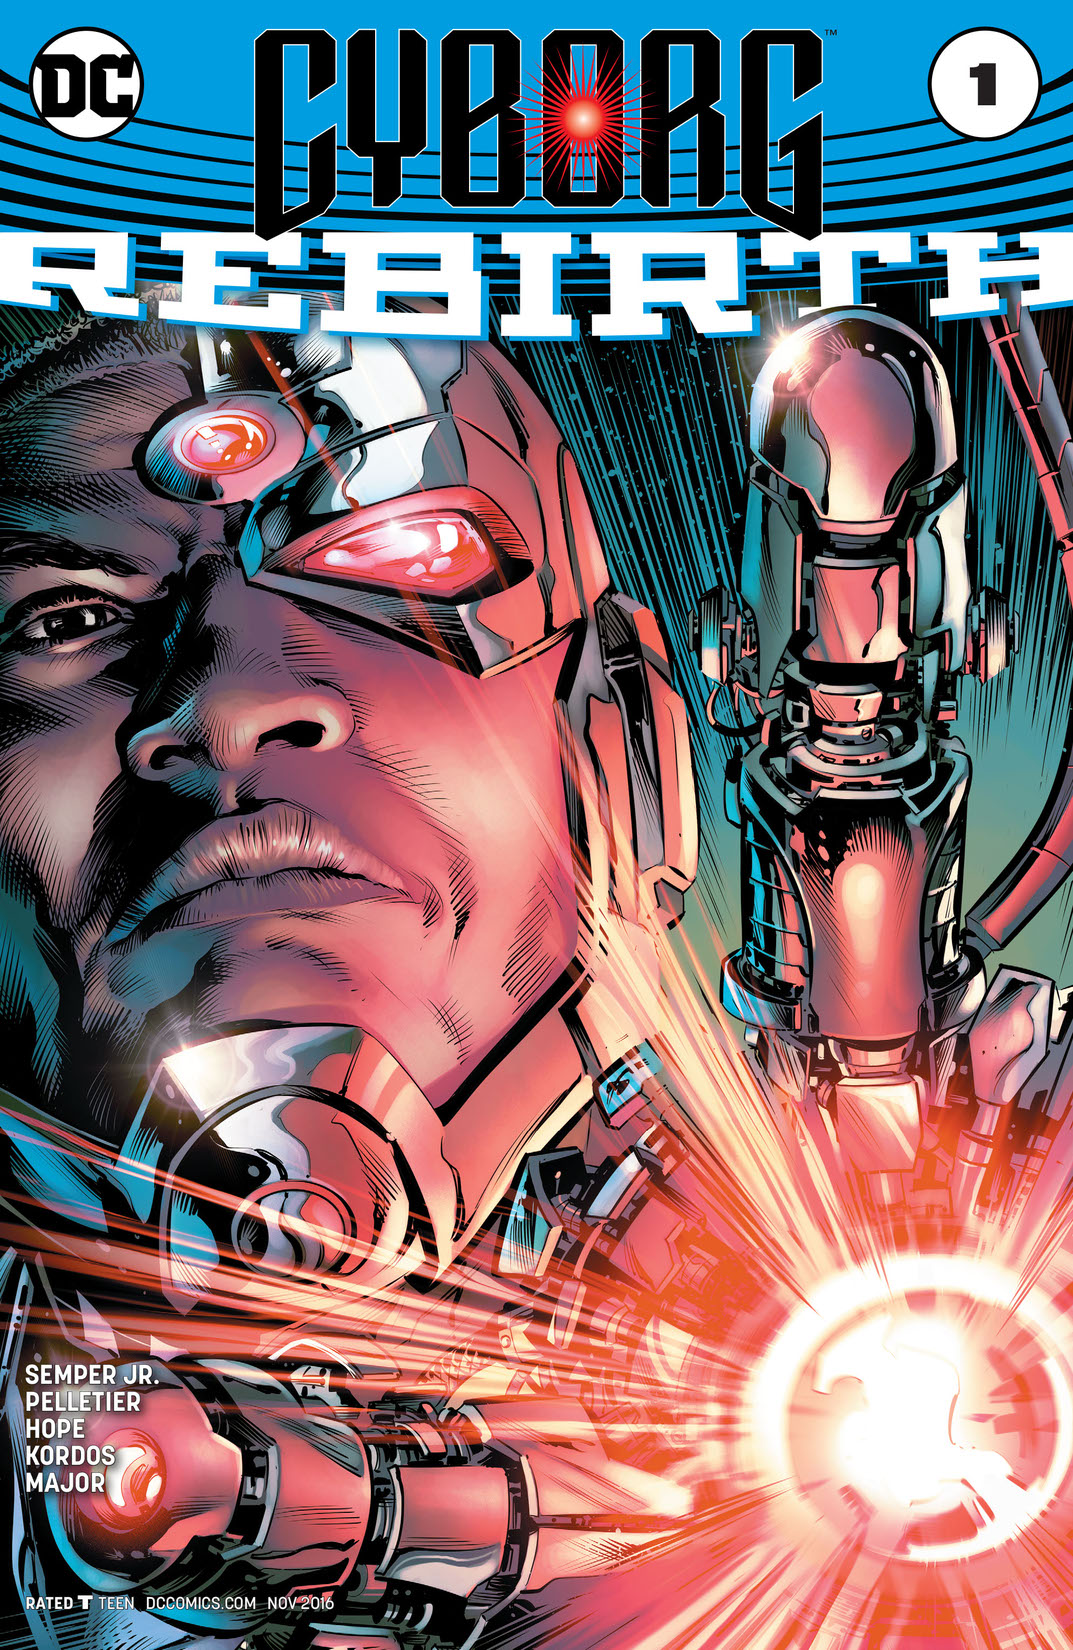 Cyborg: Rebirth (2016-) #1 preview images